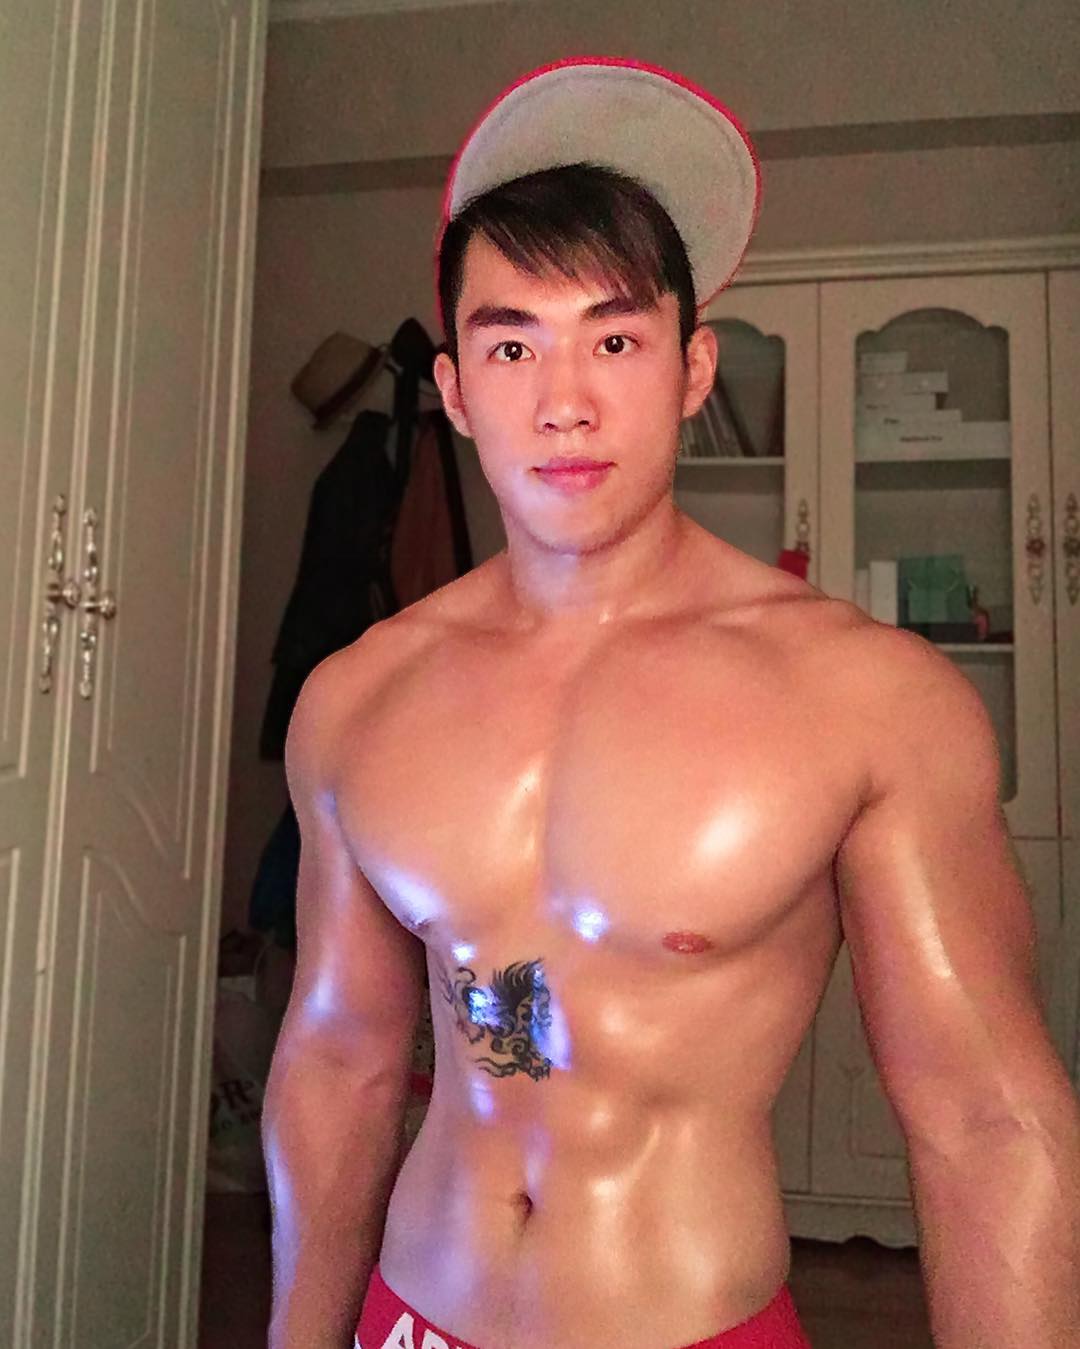 white-party-bangkok-asia-biggest-new-year-gay-party-hot-asian-guys-asias-largest-gay-travel-guide-16